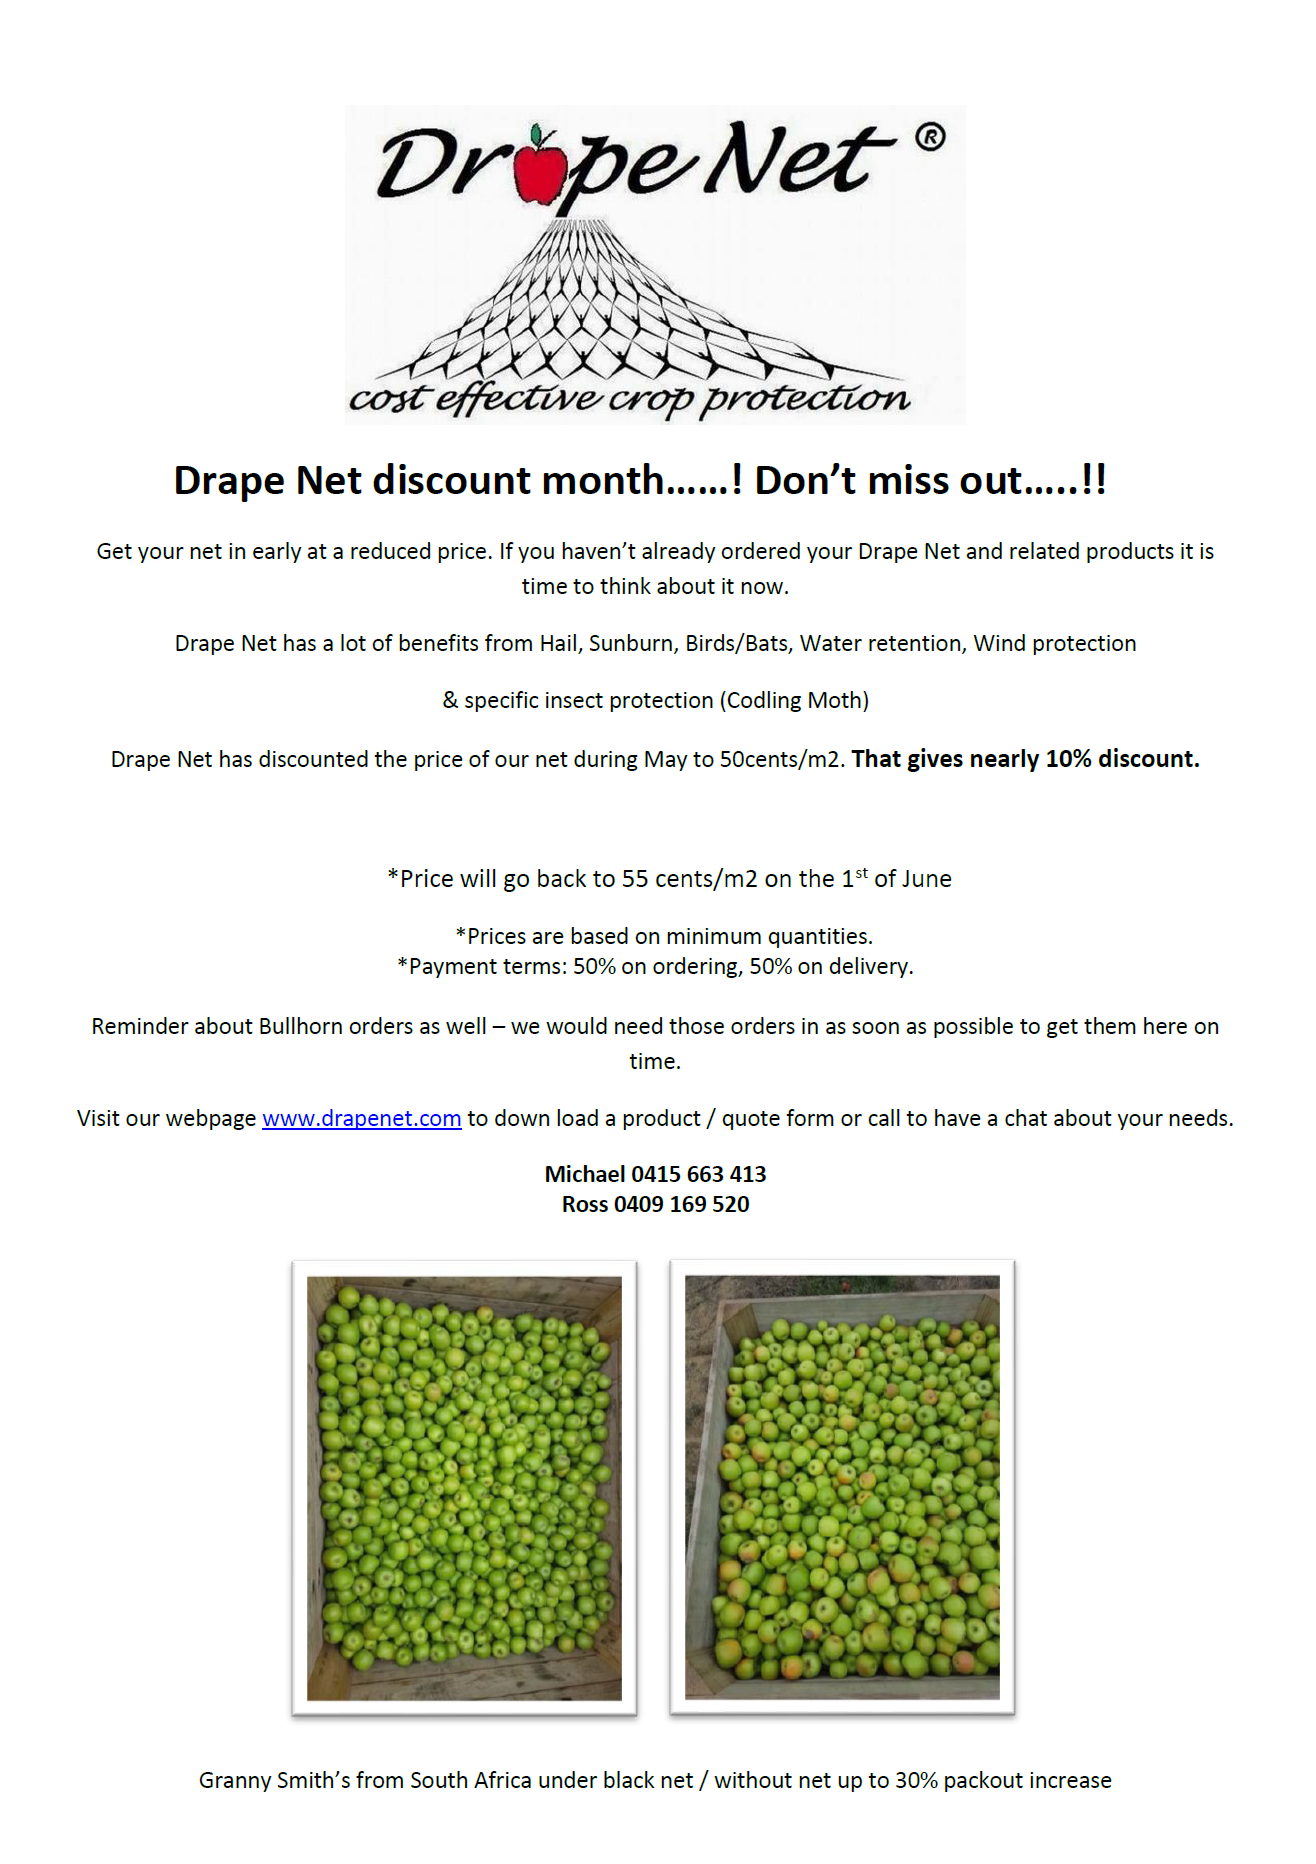 Drape Net Discount Month- Don't miss out!